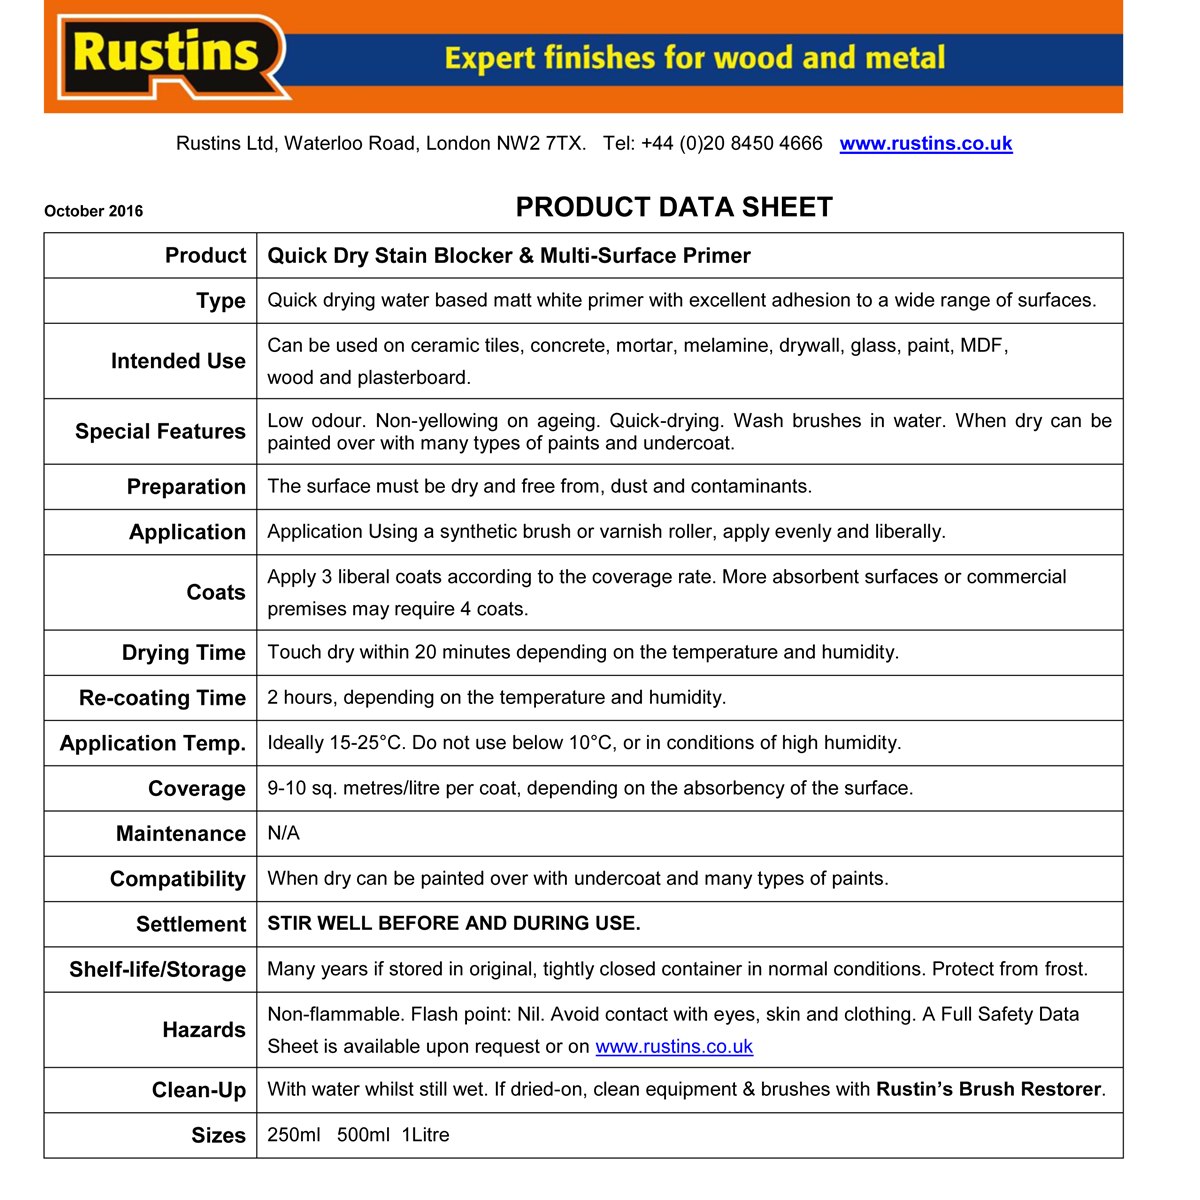 Rustins Quick Dry Stain Blocker Multi-Surface Primer Usage_Instructions